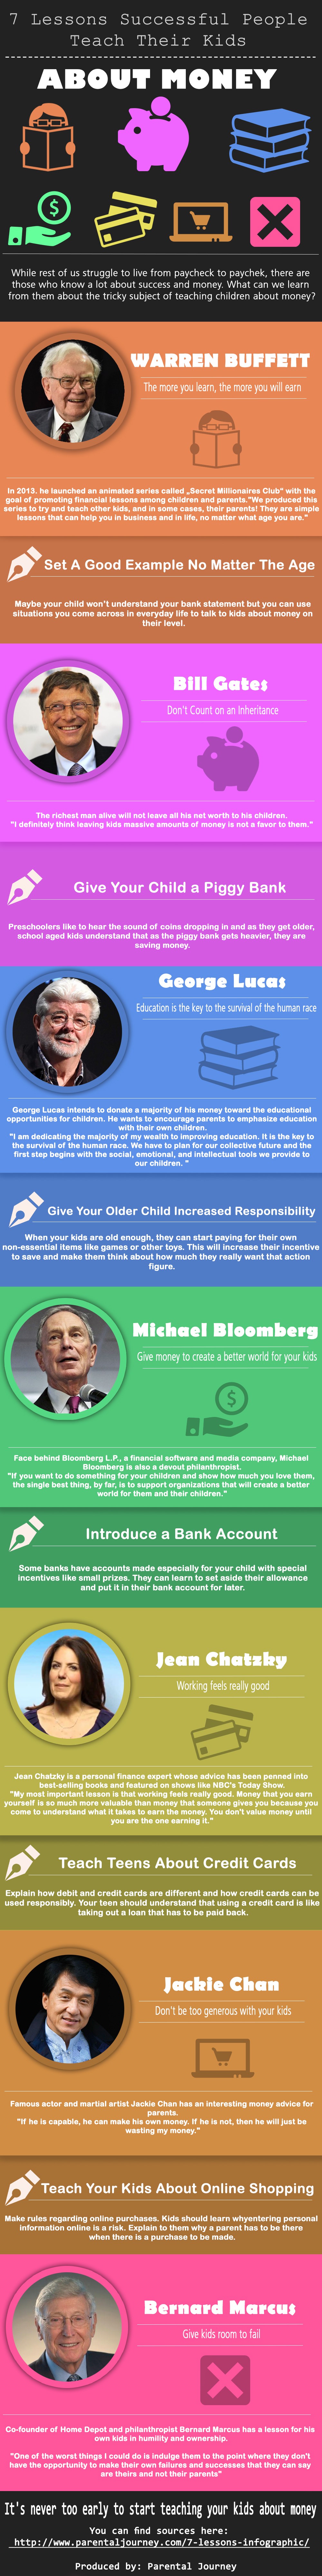 How Successful People Teach Their Kids About Money